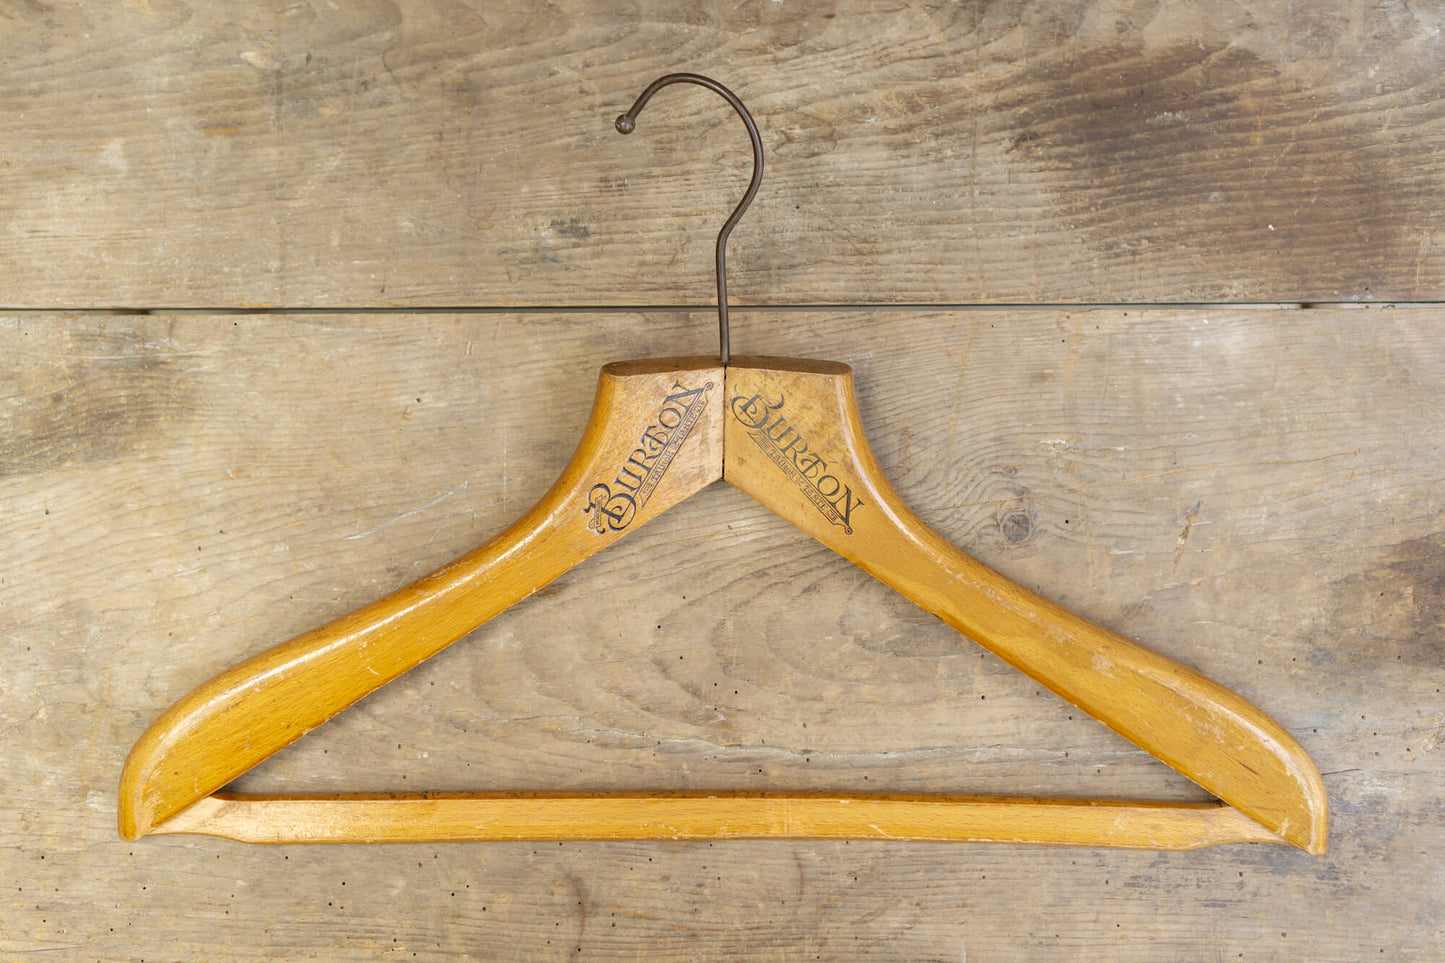 Wooden Clothes Hangers